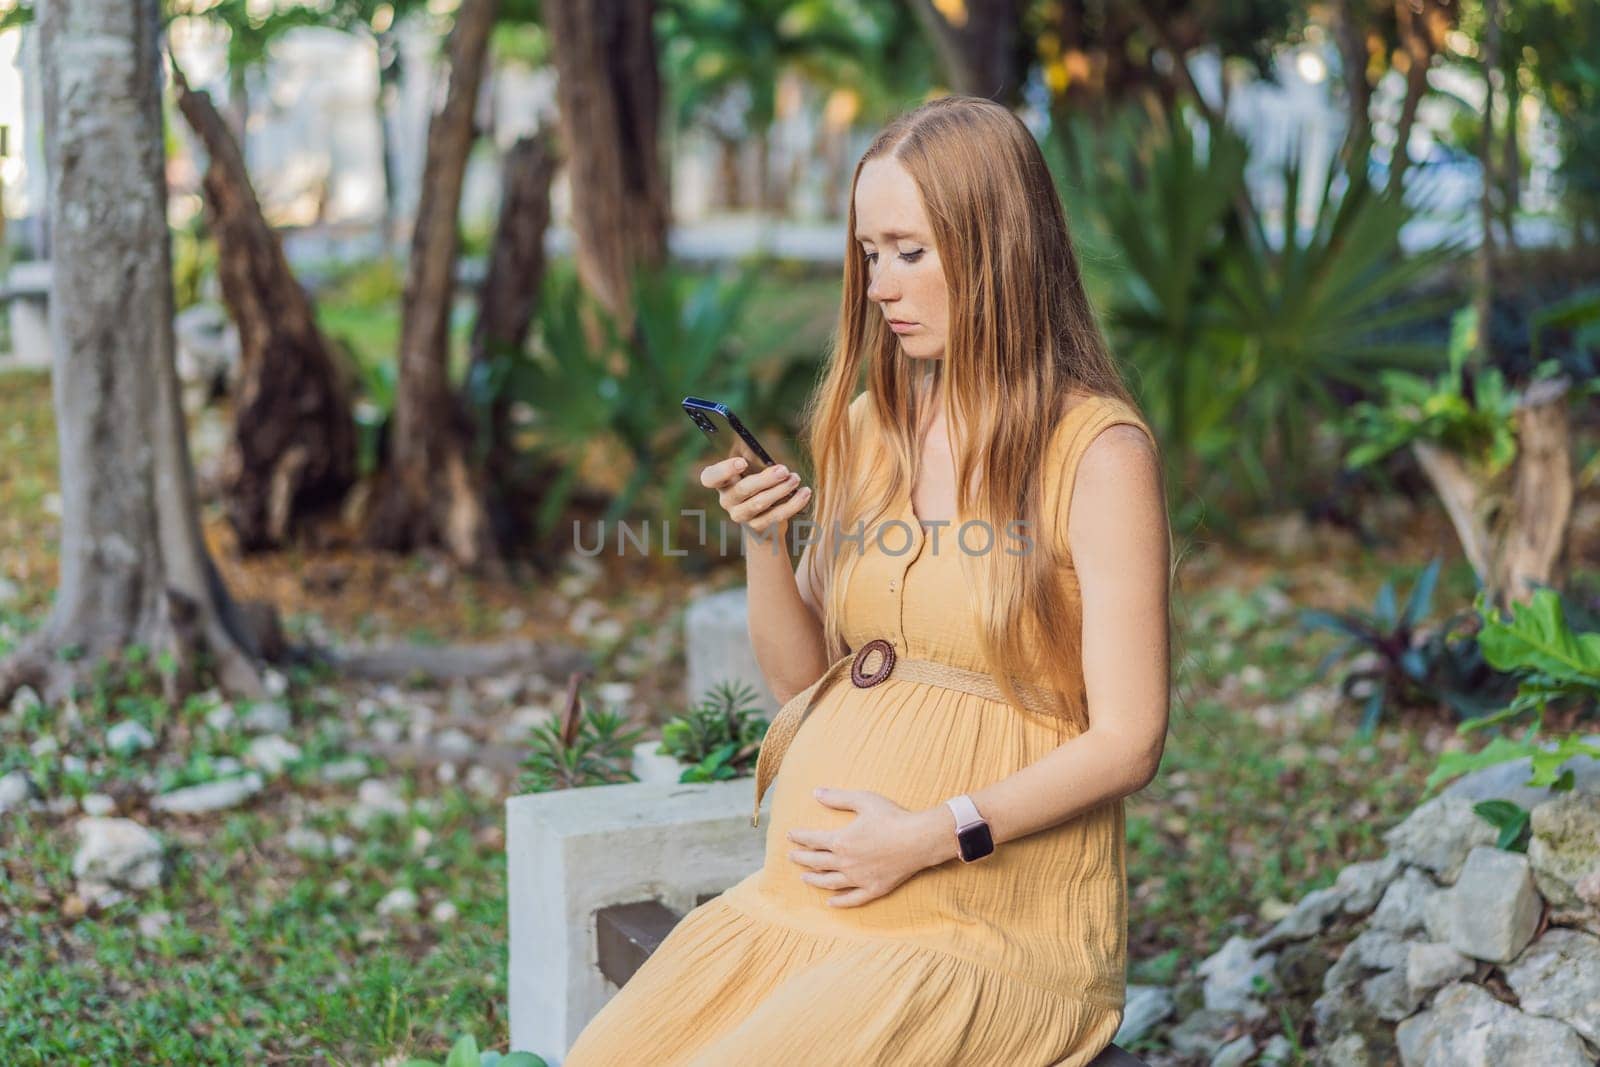 pregnant woman enjoys the tranquility of the park, captivated by her phone, blending the beauty of nature with the modern connection during her pregnancy.